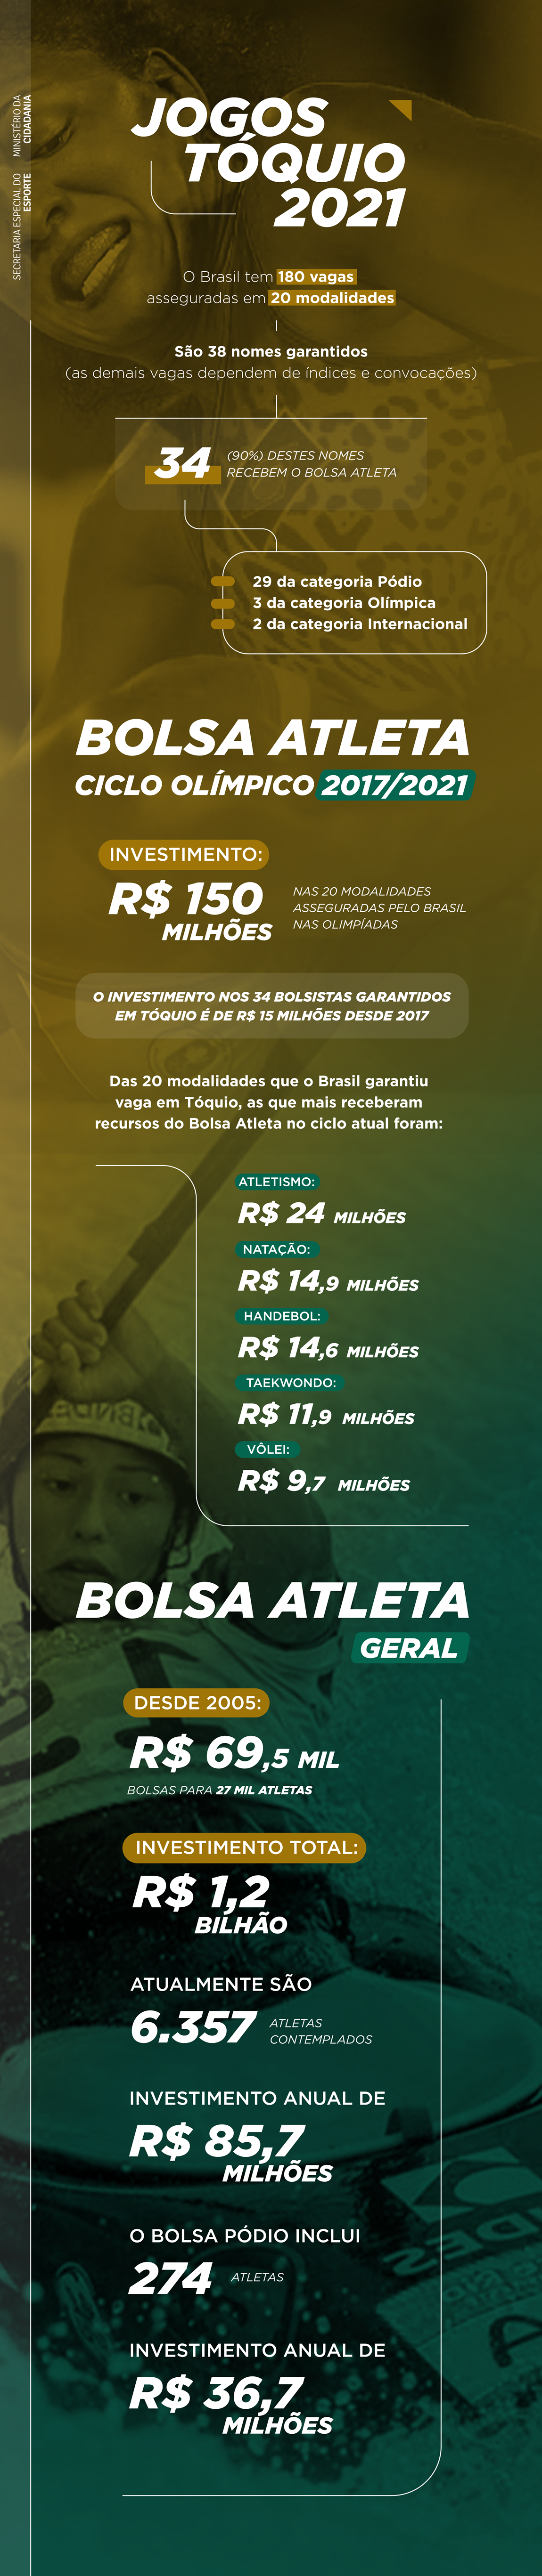 08012021_infografico.png